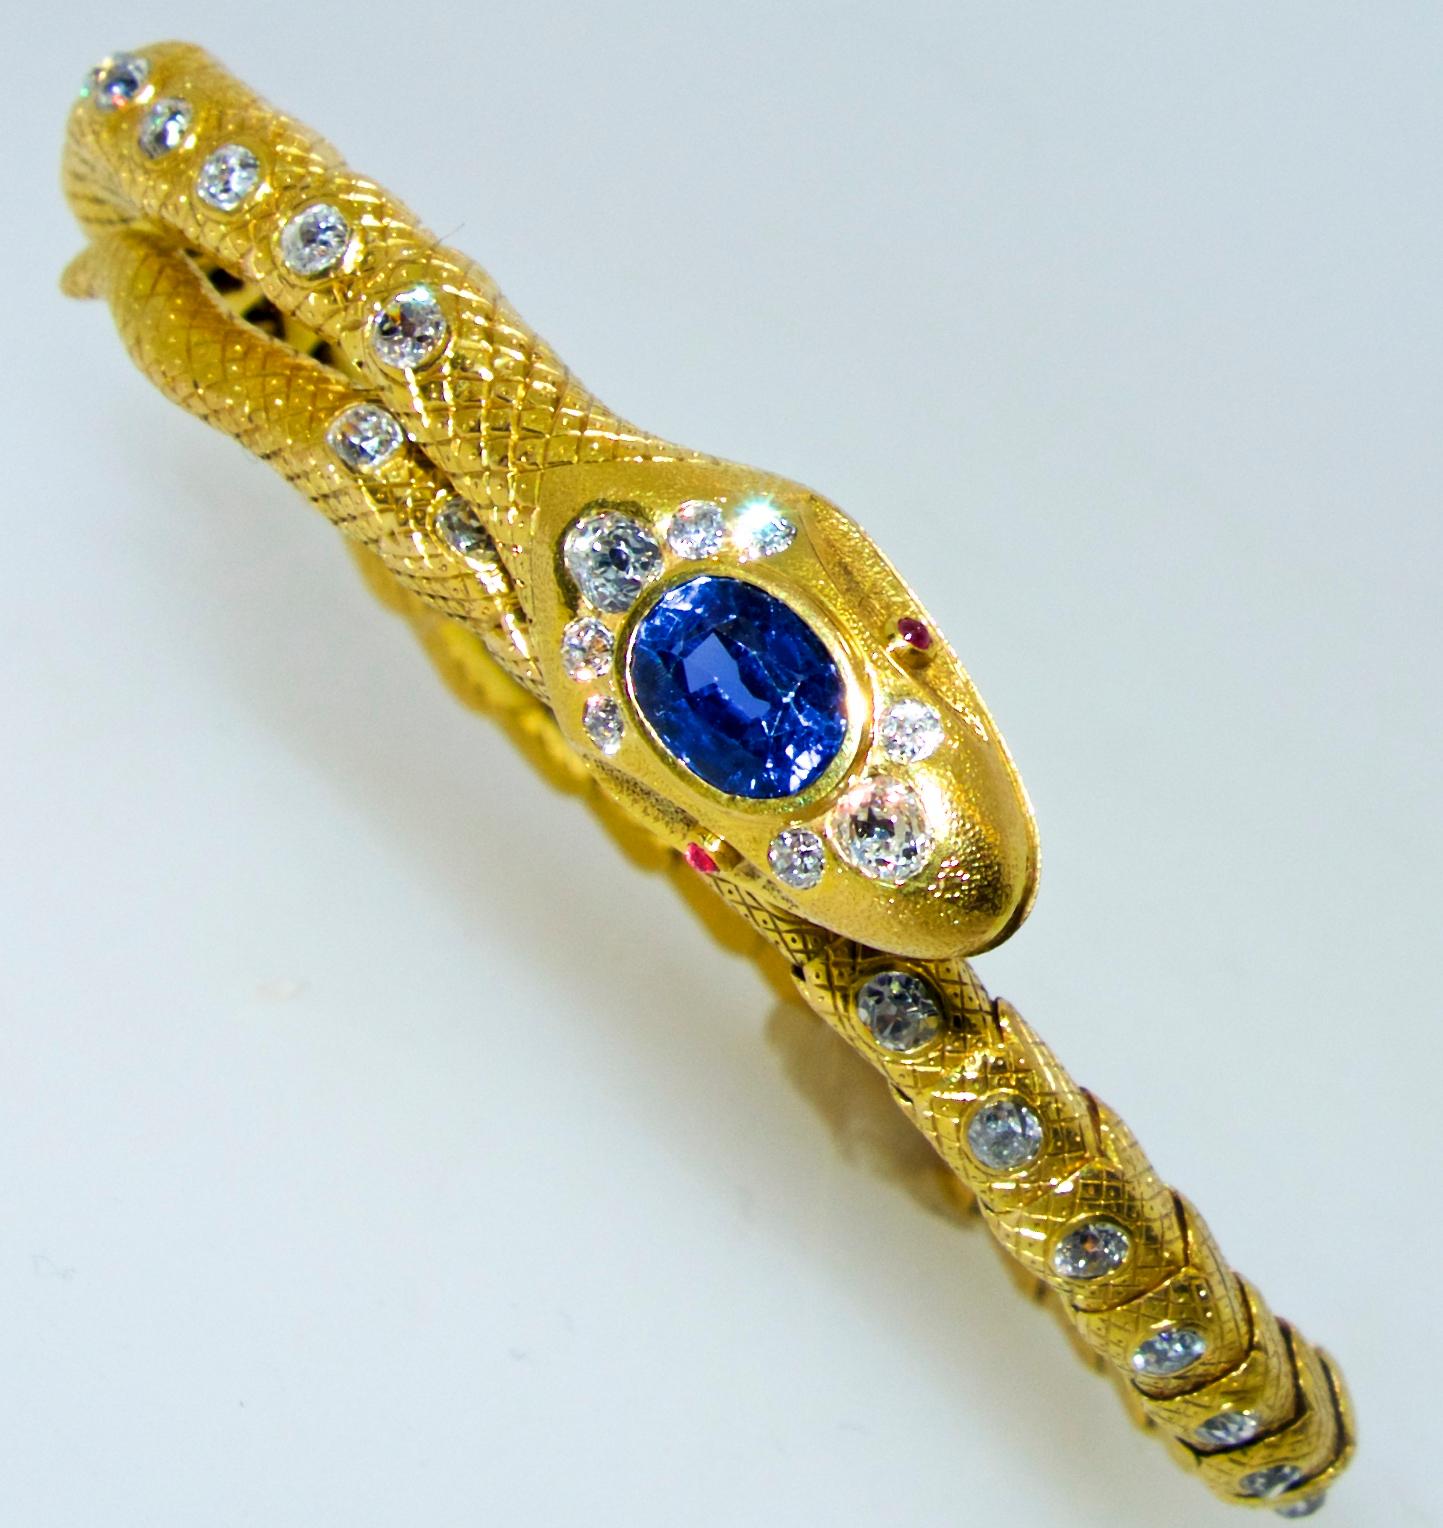 Antique Serpent  bracelet in 18K which will wrap around just about any wrist size.  The sapphire weighs approximately 2 cts. and is an natural unheated Ceylon stone.  There are 46 mine cut diamonds amounting to approximately 3.8 cts.  These old cut